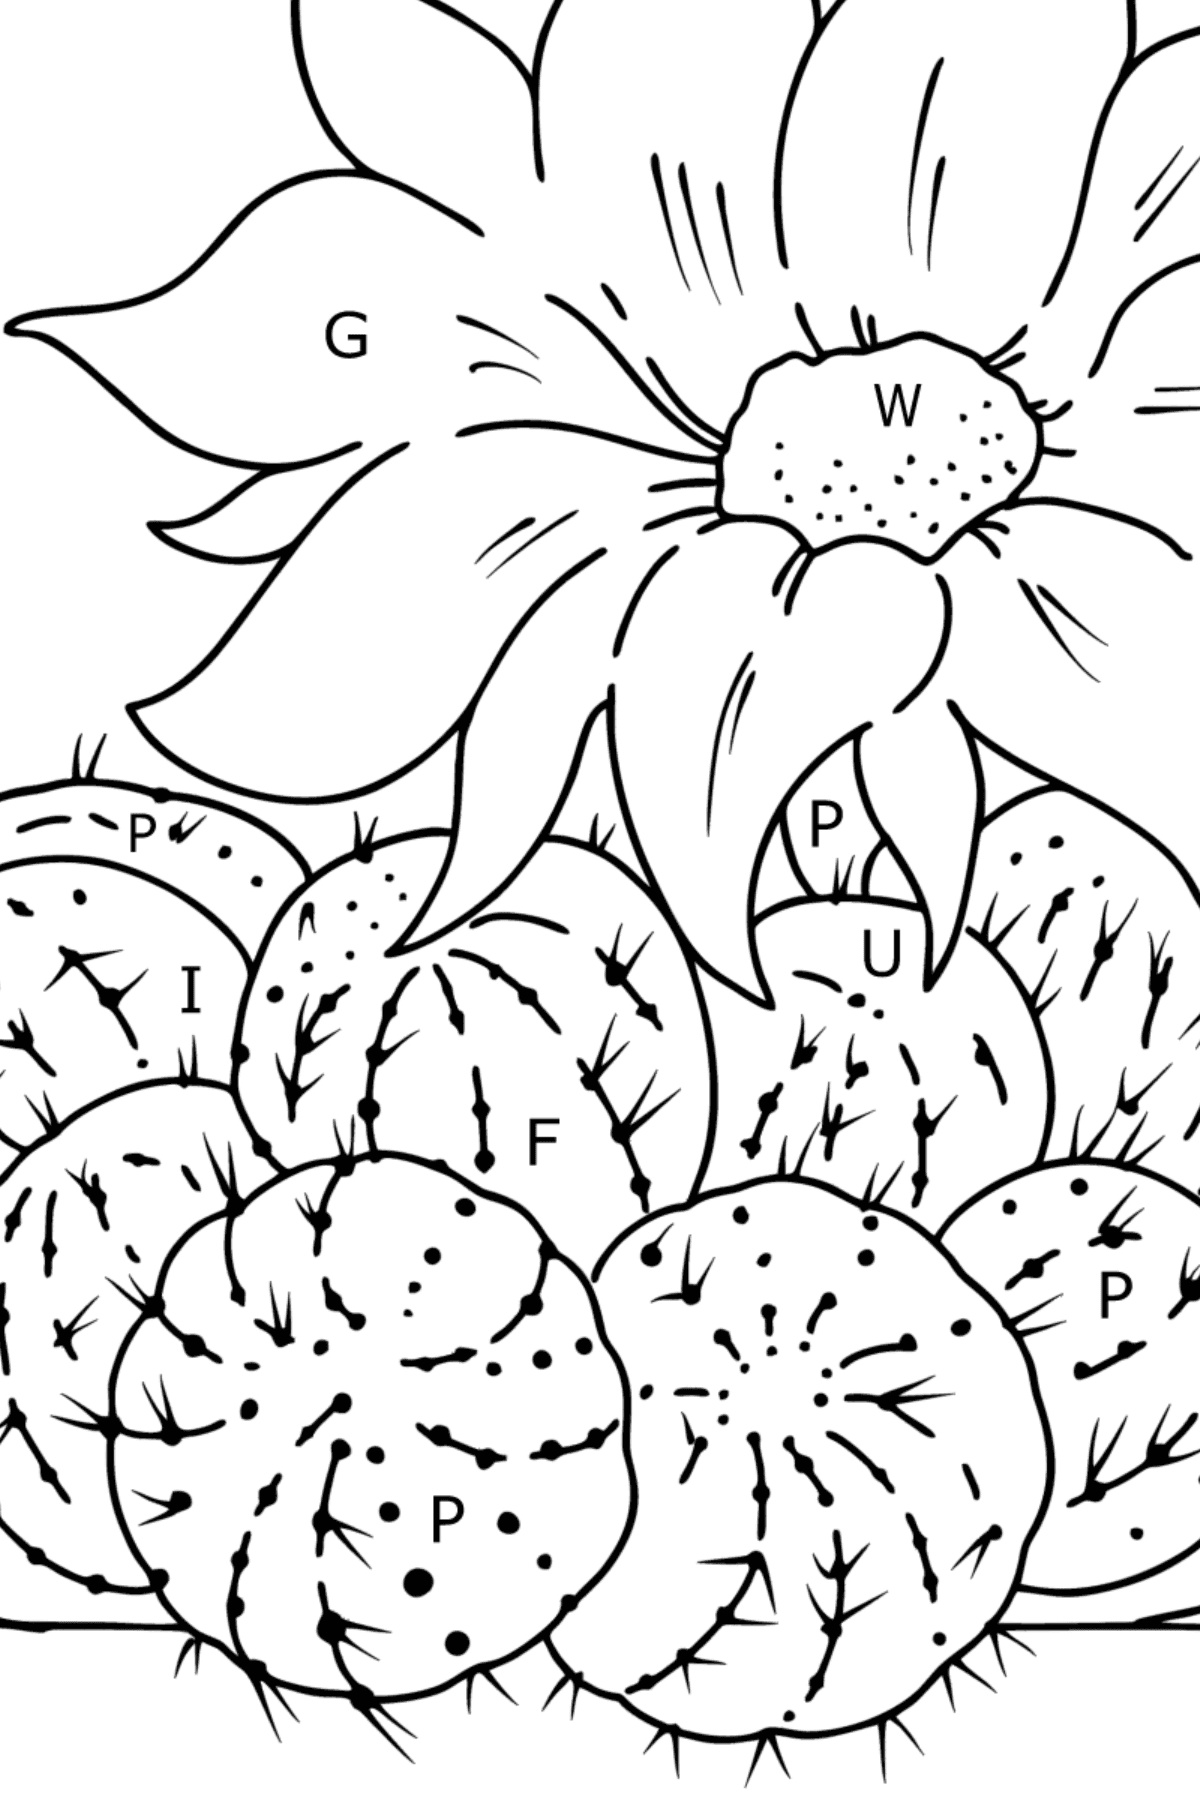 Little Nipple Cactus Coloring page - Coloring by Letters for Kids